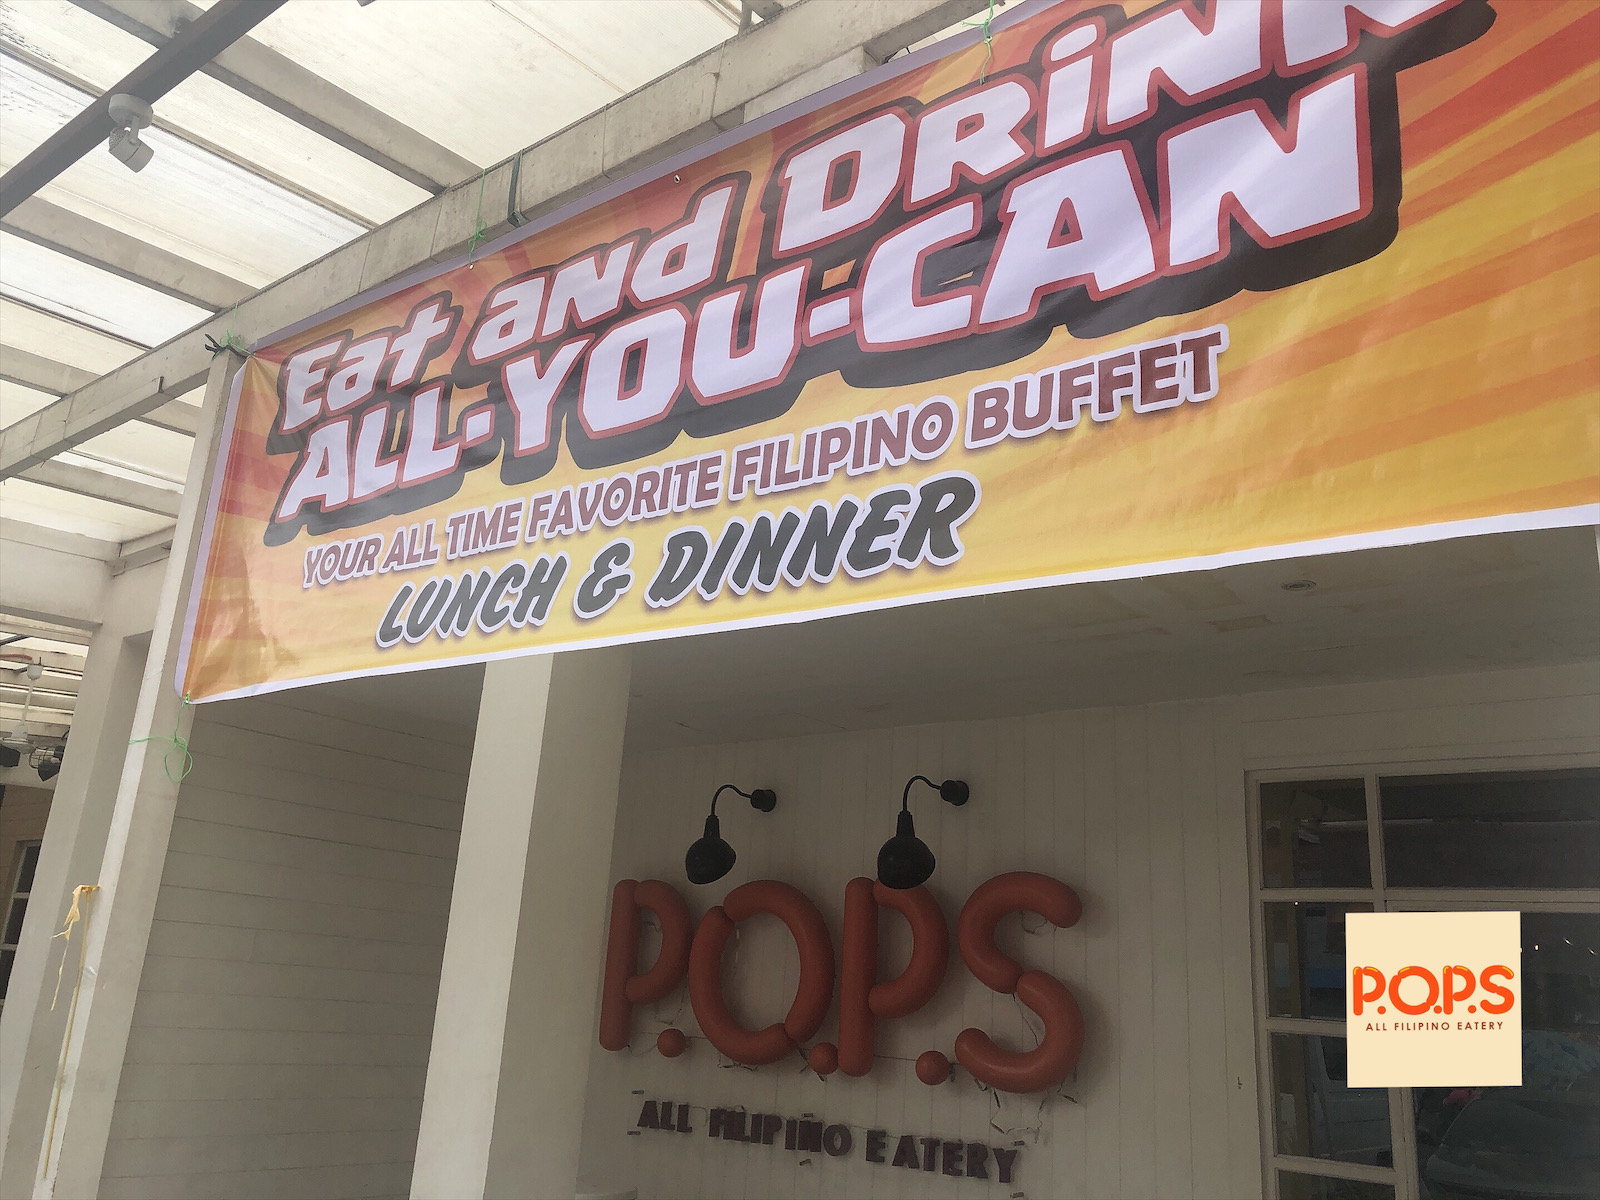 Head to POPS CDO for the best, sulit buffet in Cagayan de Oro